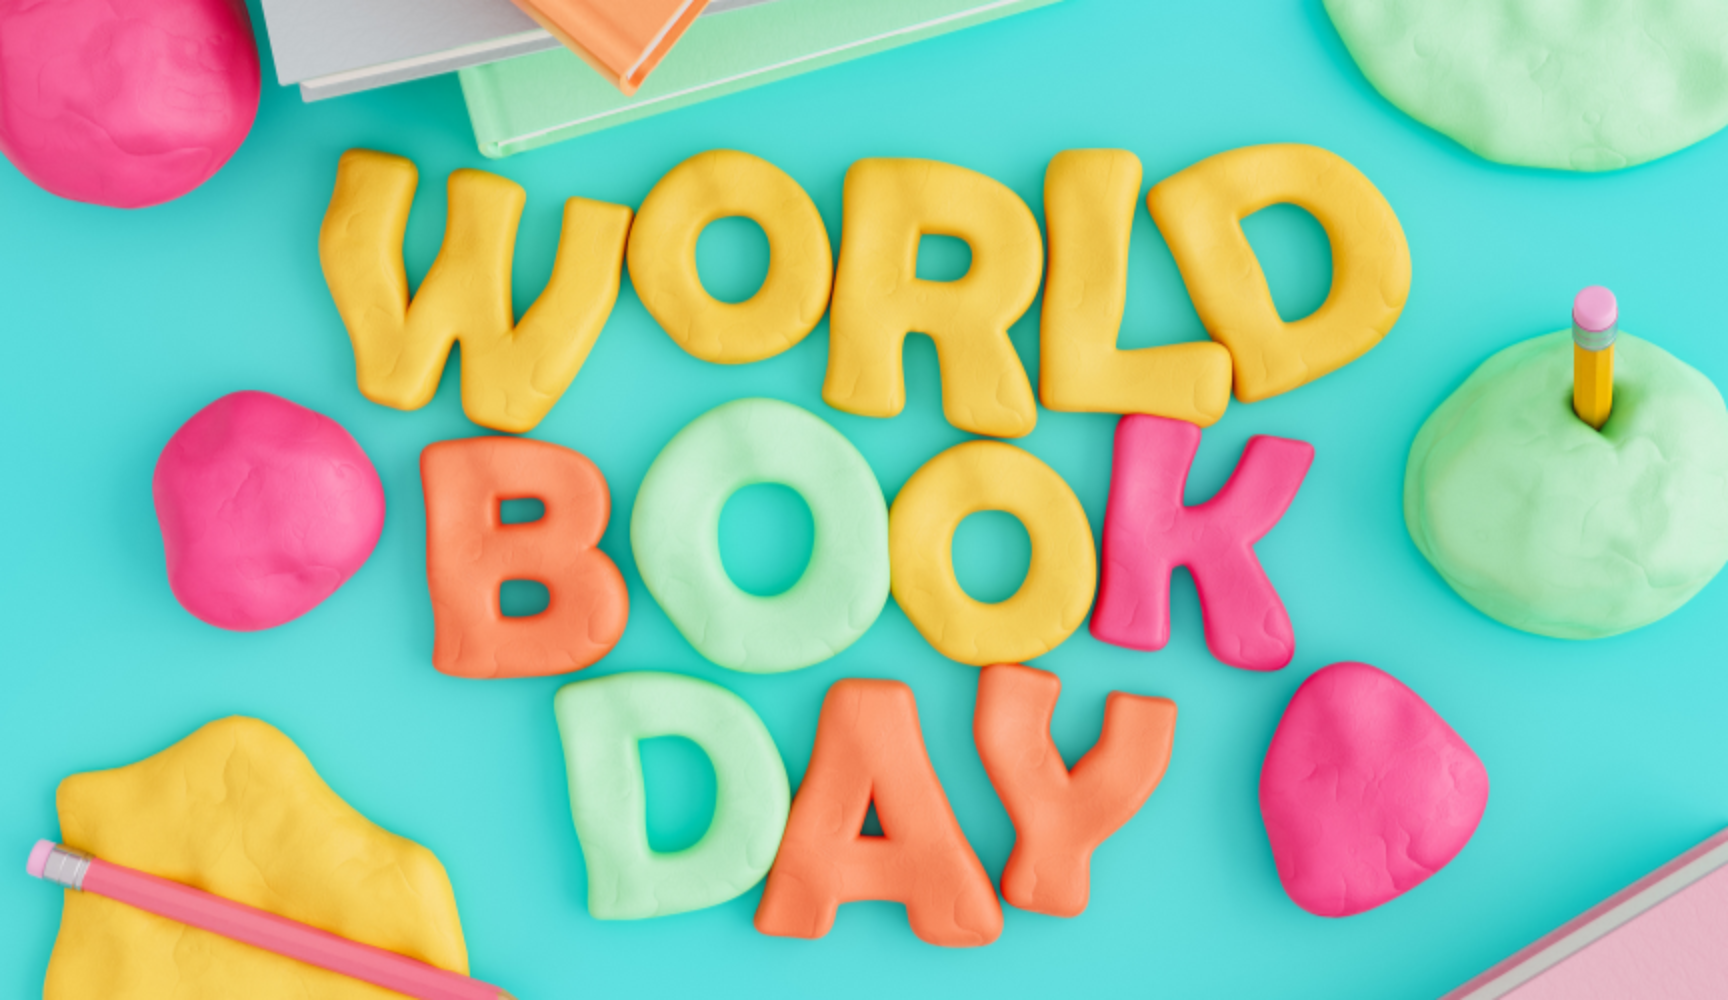 World book day competition